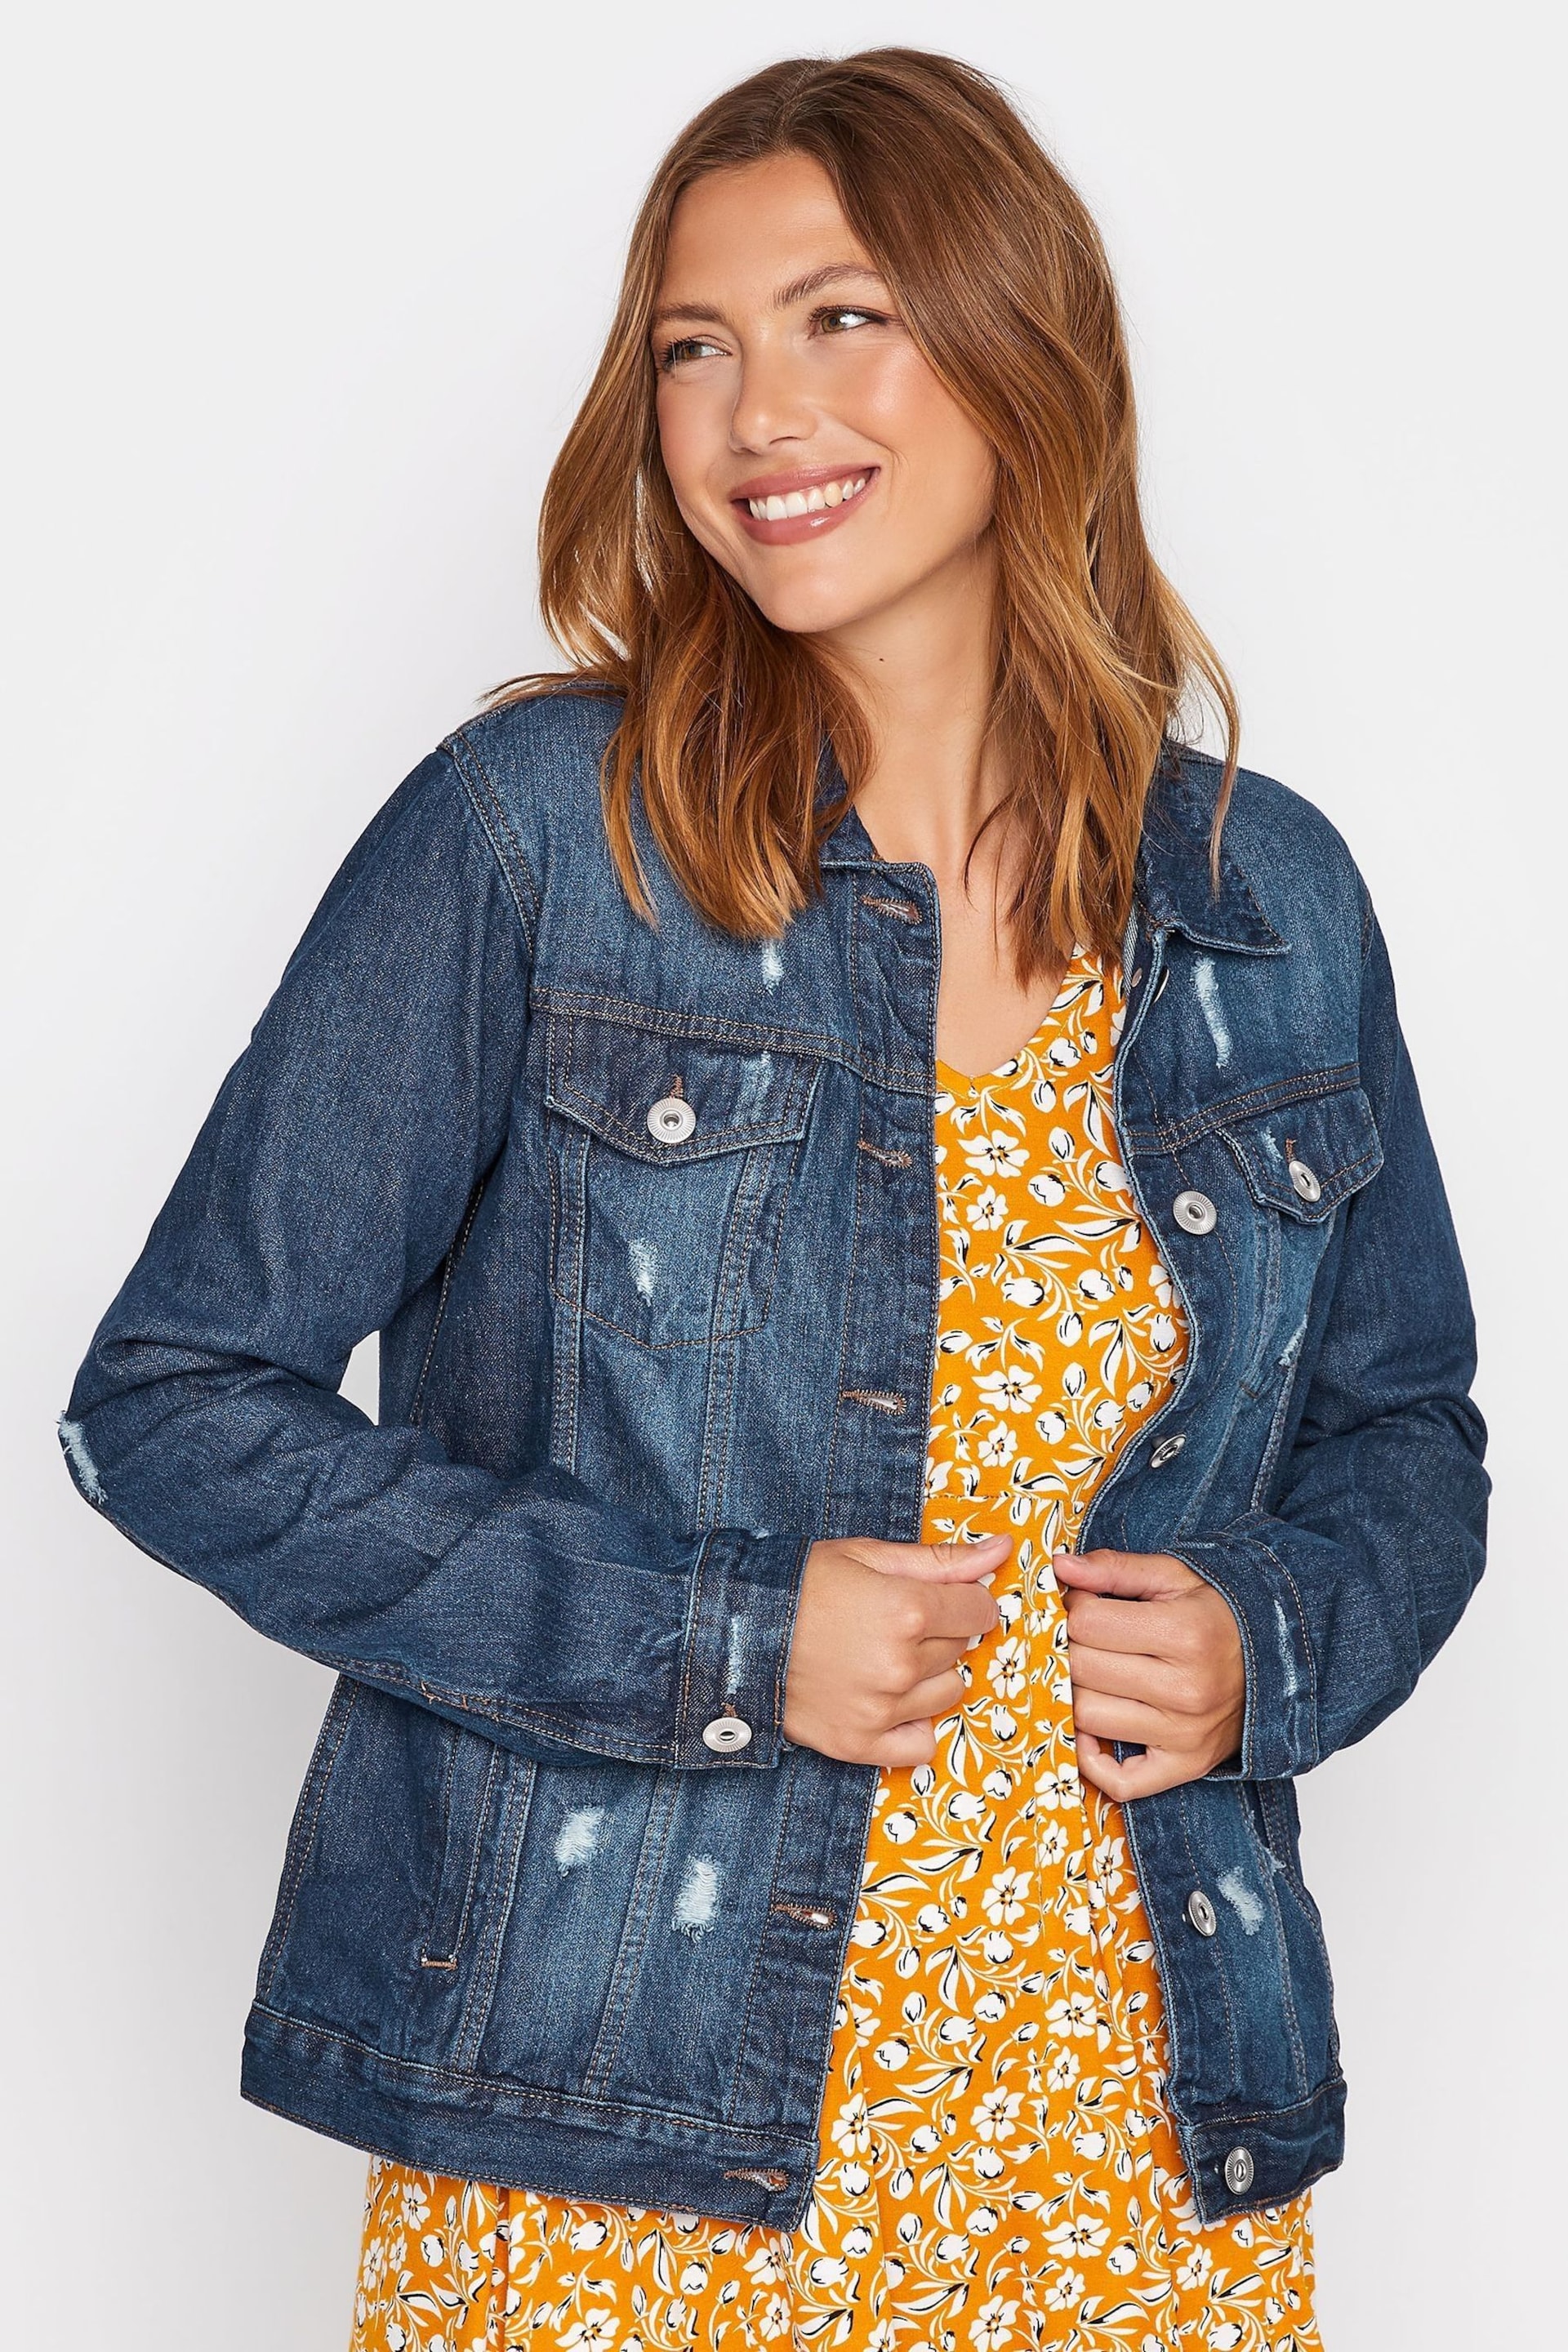 Long Tall Sally Blue Distressed Denim Jacket - Image 1 of 4